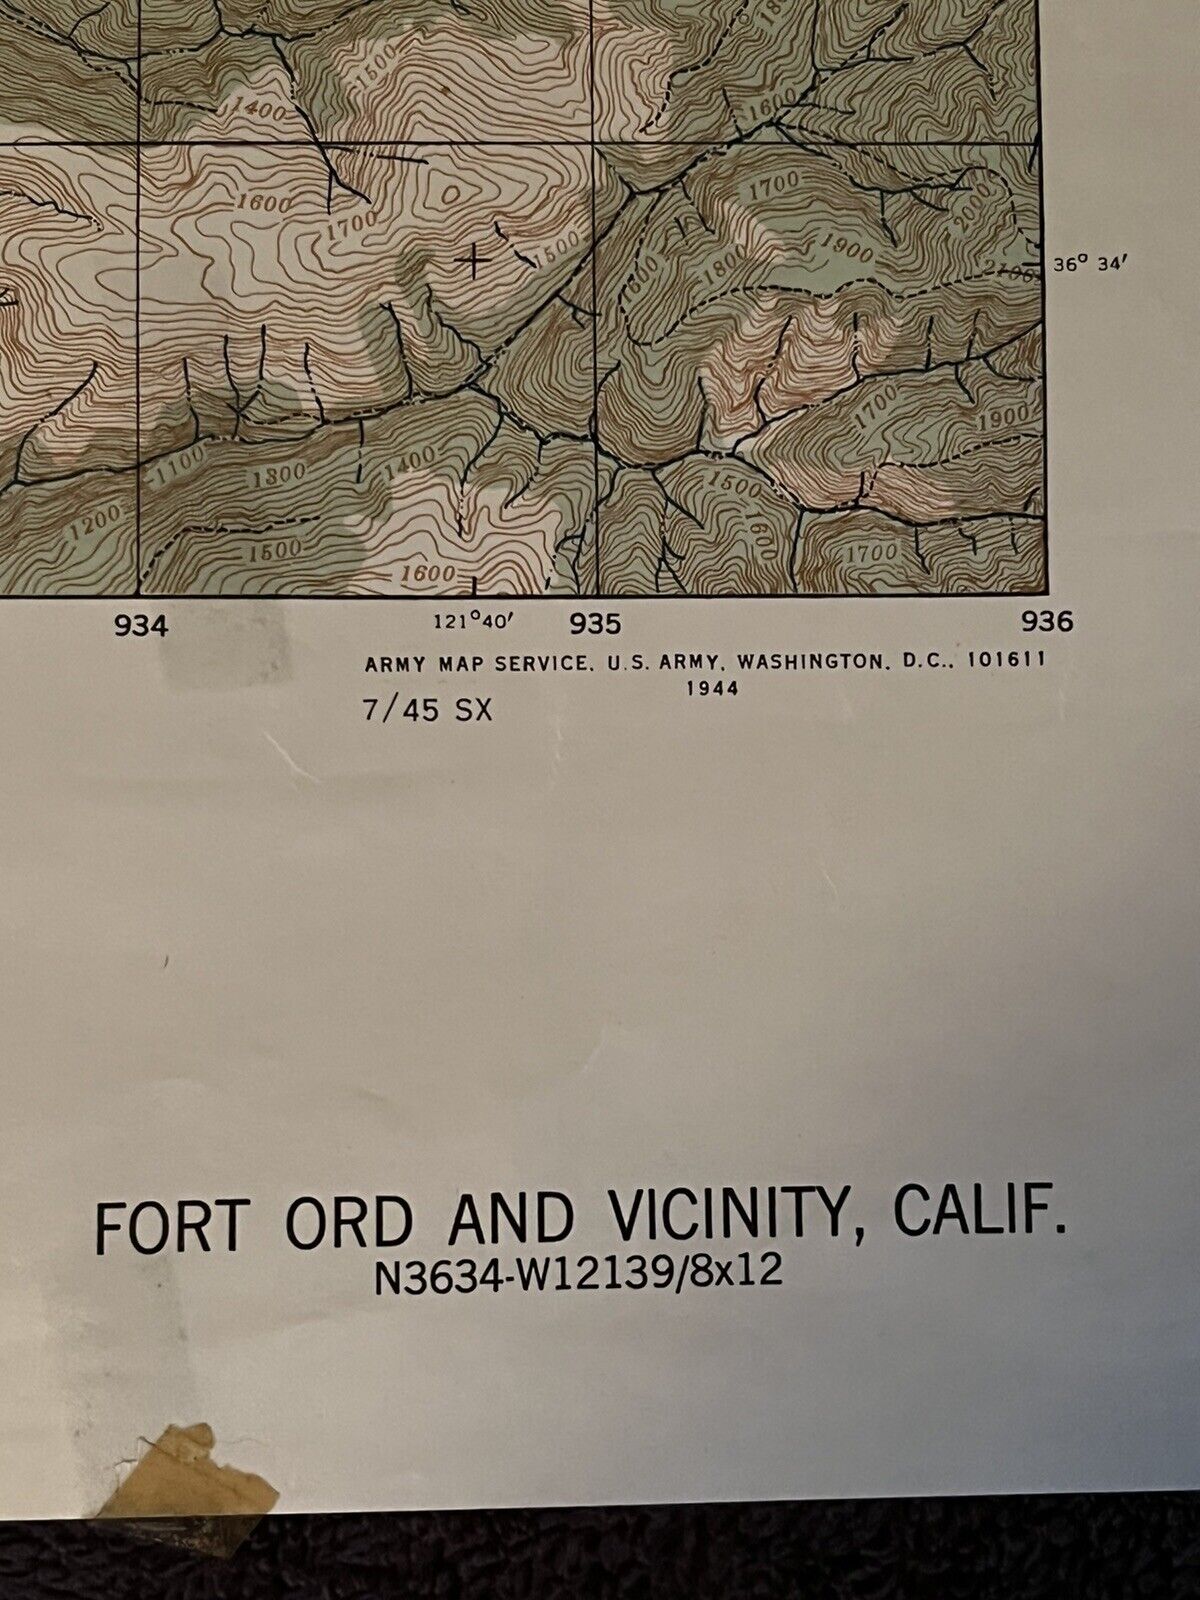 WWII WAR DEPARTMENT ARMY CORPS ENGINEERS FORT ORD Salinas CA 1944 MONTEREY MAP